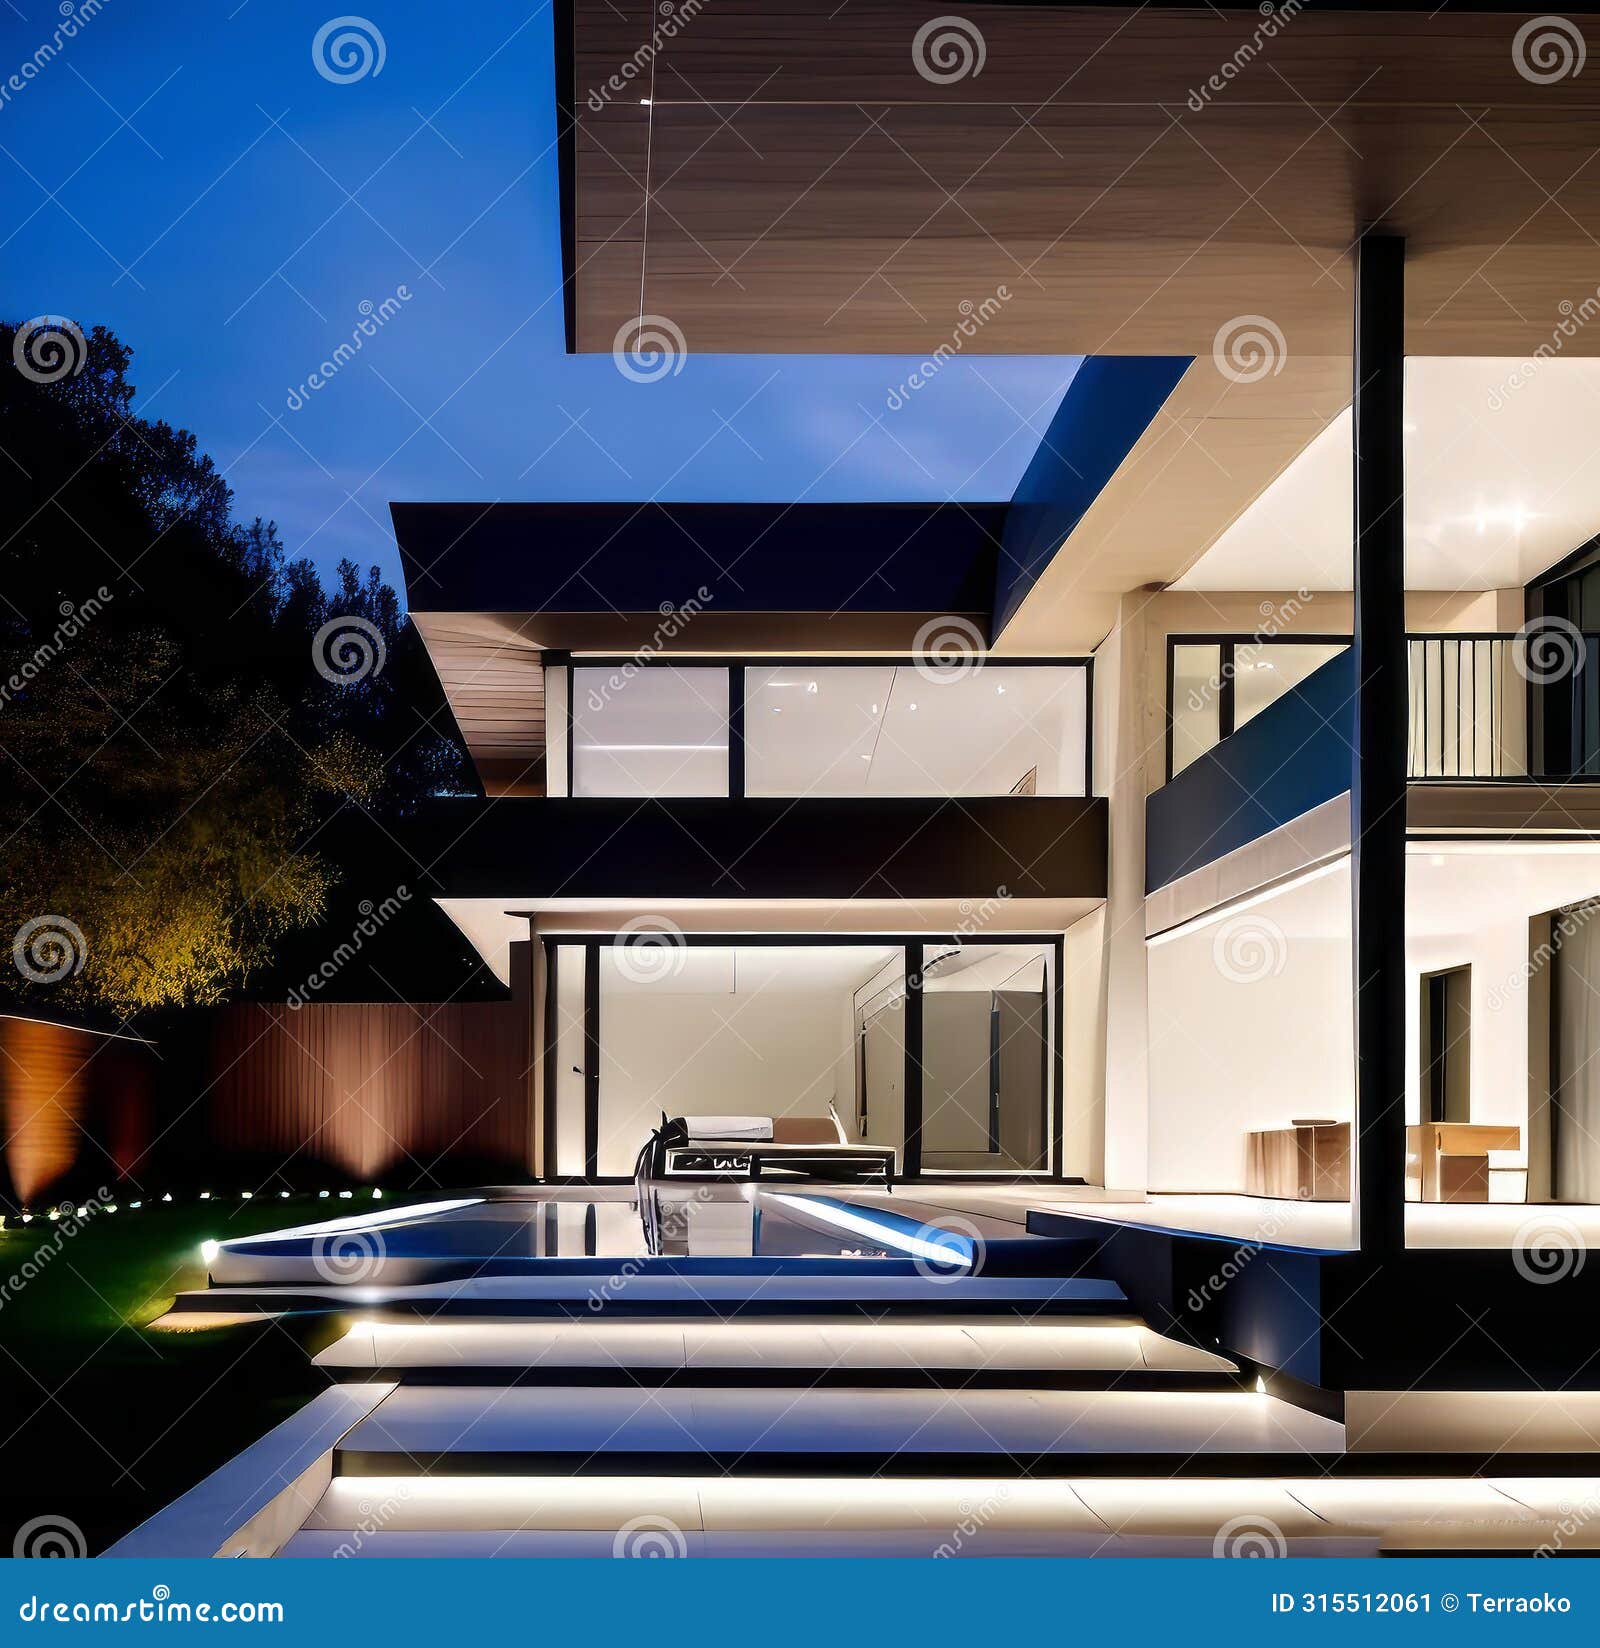 luxurious villa for outdoor living, ed according to algorithms in the form of a street view